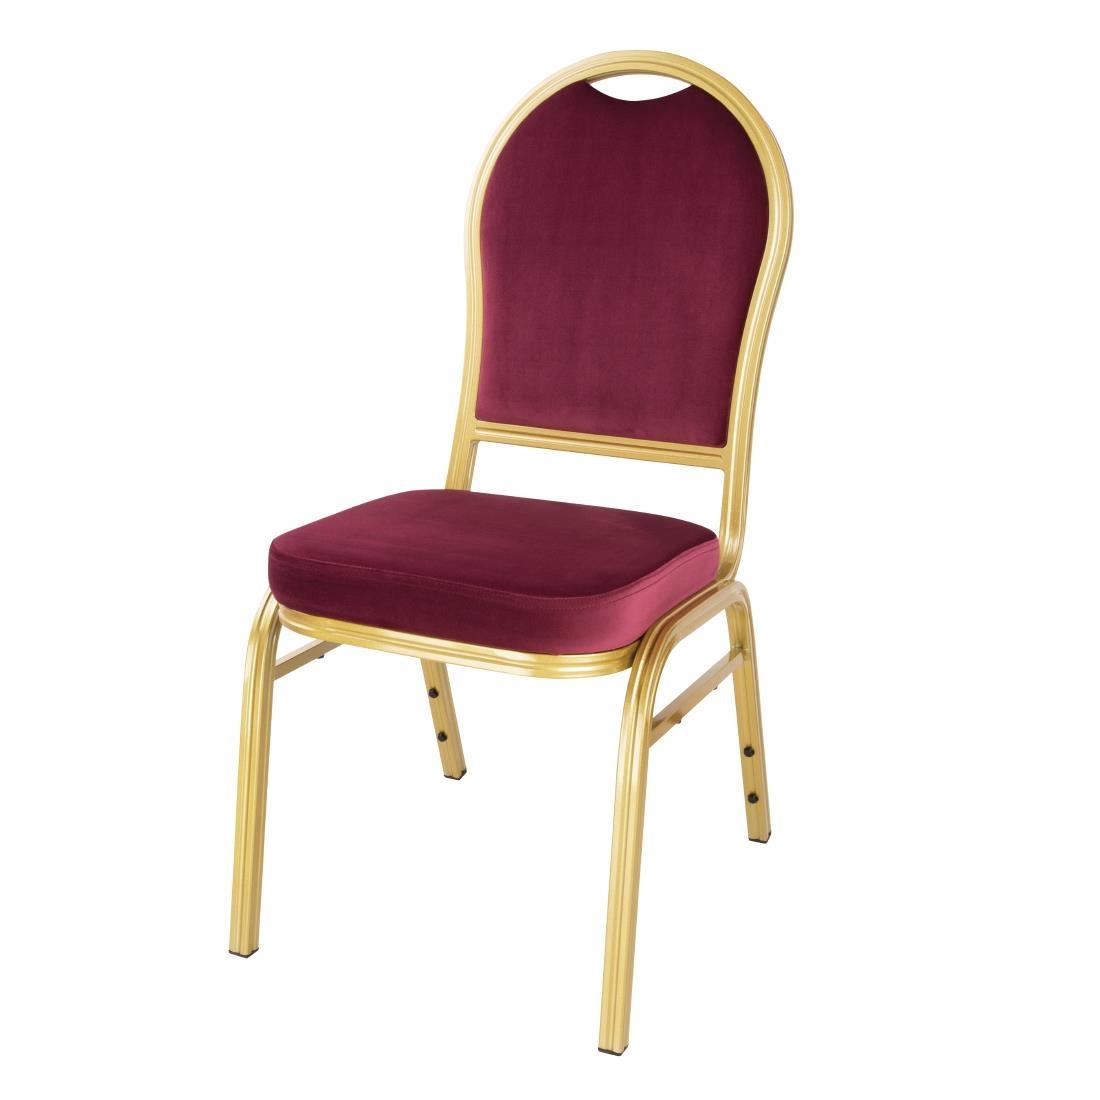 Bolero Regal Banquet Chairs Claret (Pack of 4) - DY695  - 1